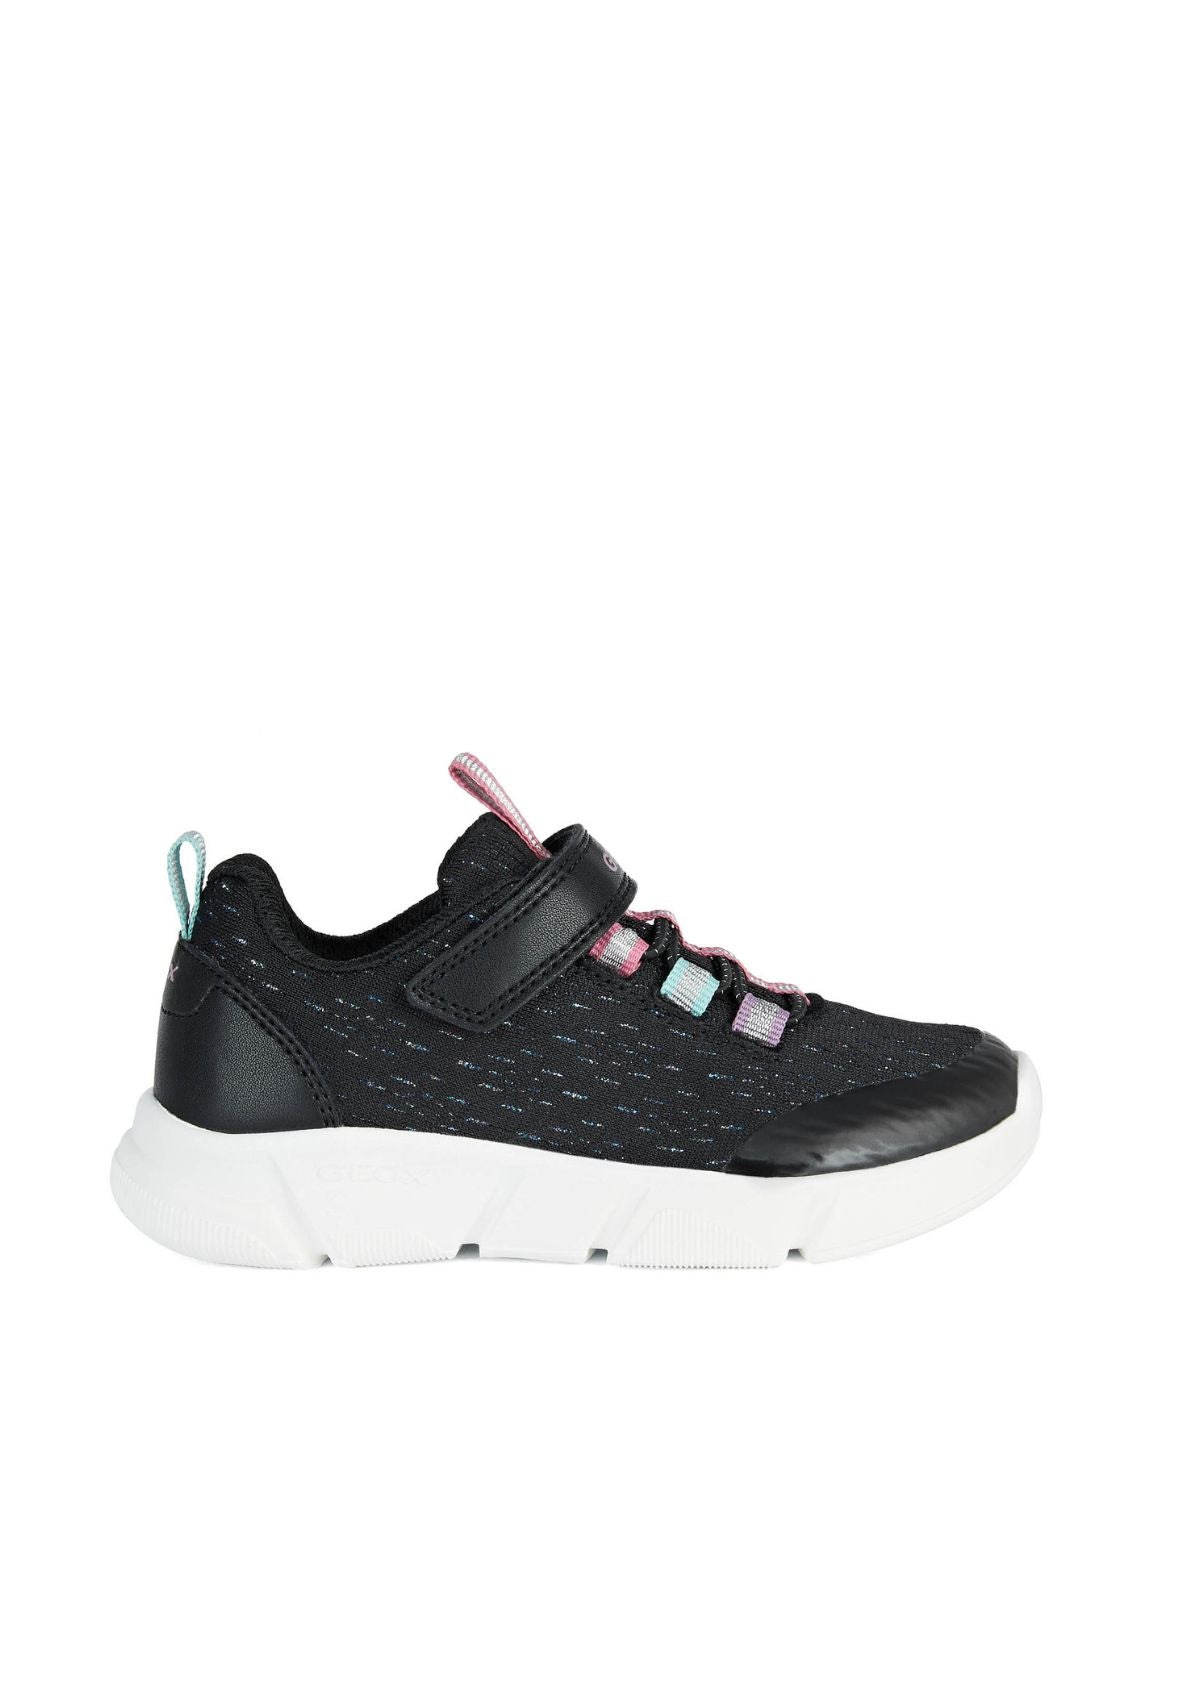 Geox Girls Trainers ARIL Black Multicolour side